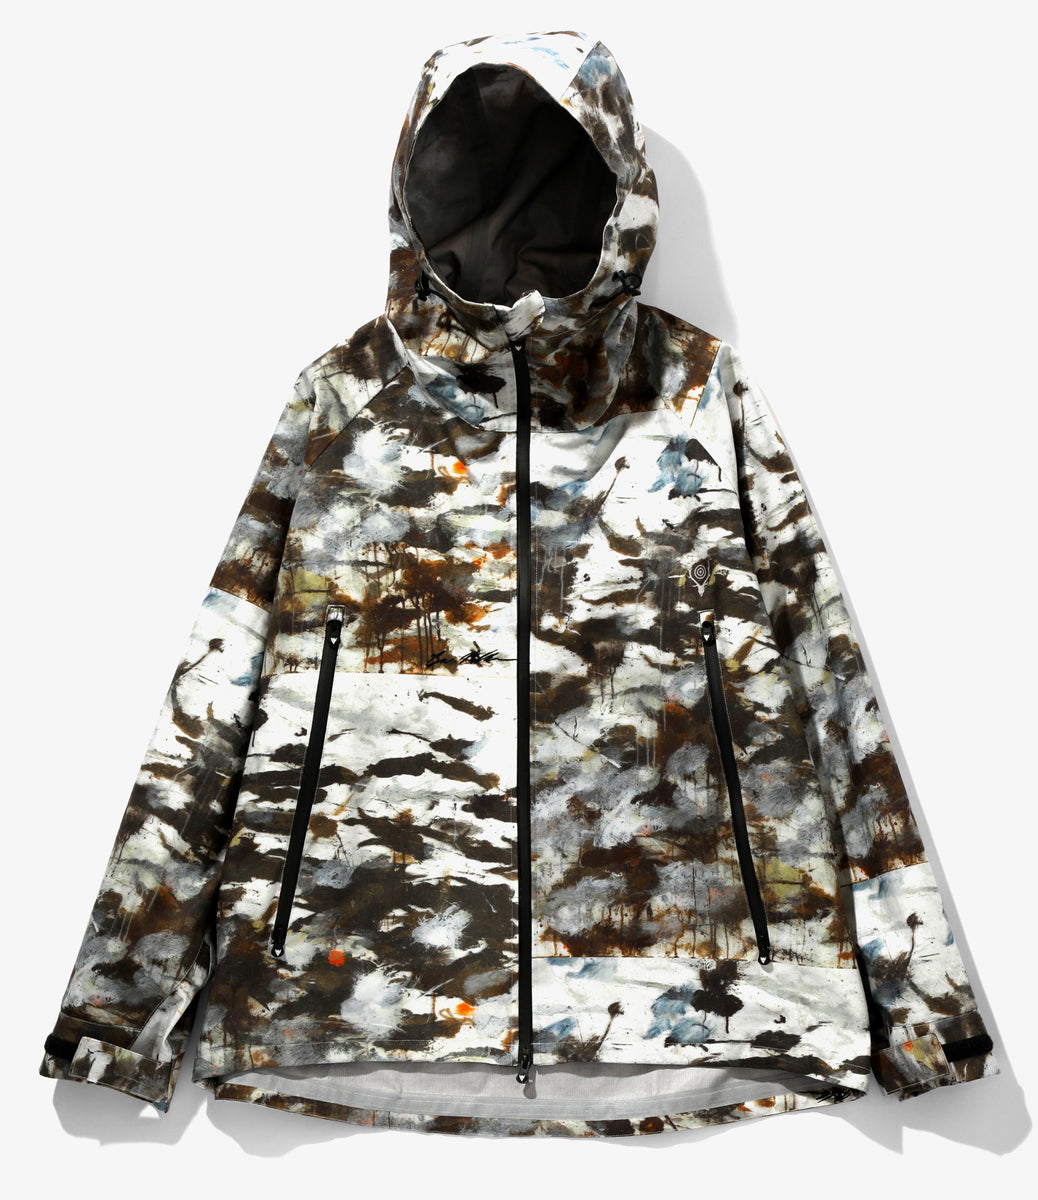 Weather Effect Jacket - Cotton Ripstop / Painting Pt. – NEPENTHES